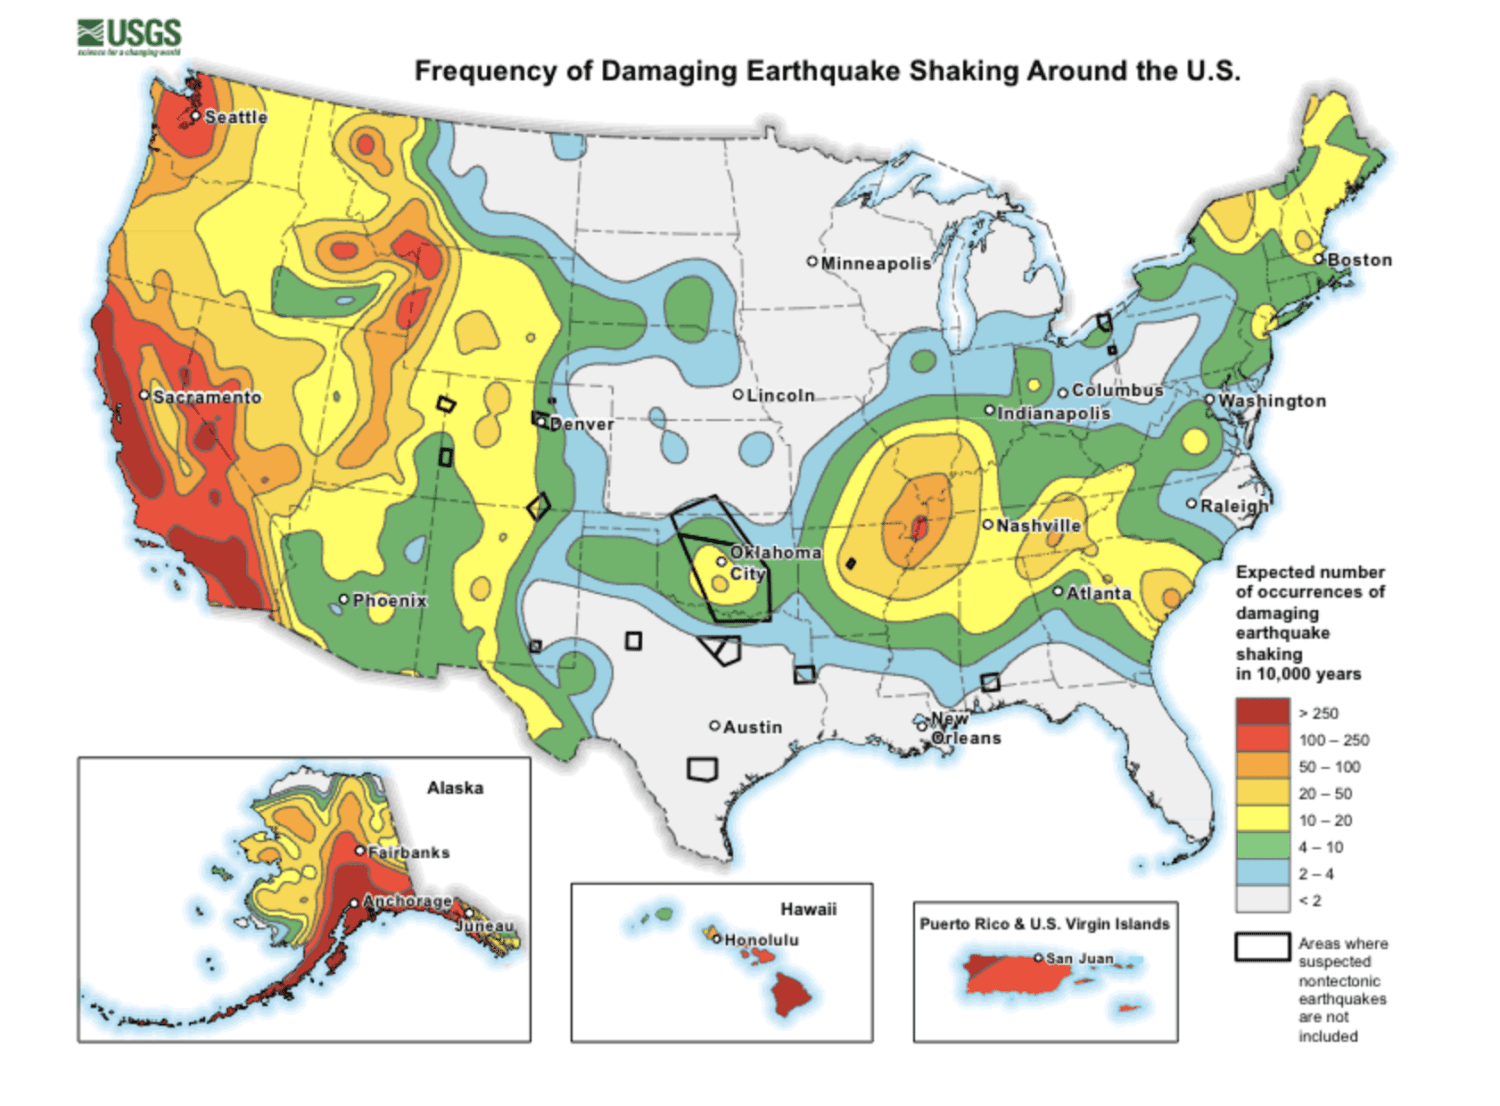 frequency of damaging earthquake shaking around the U.S.